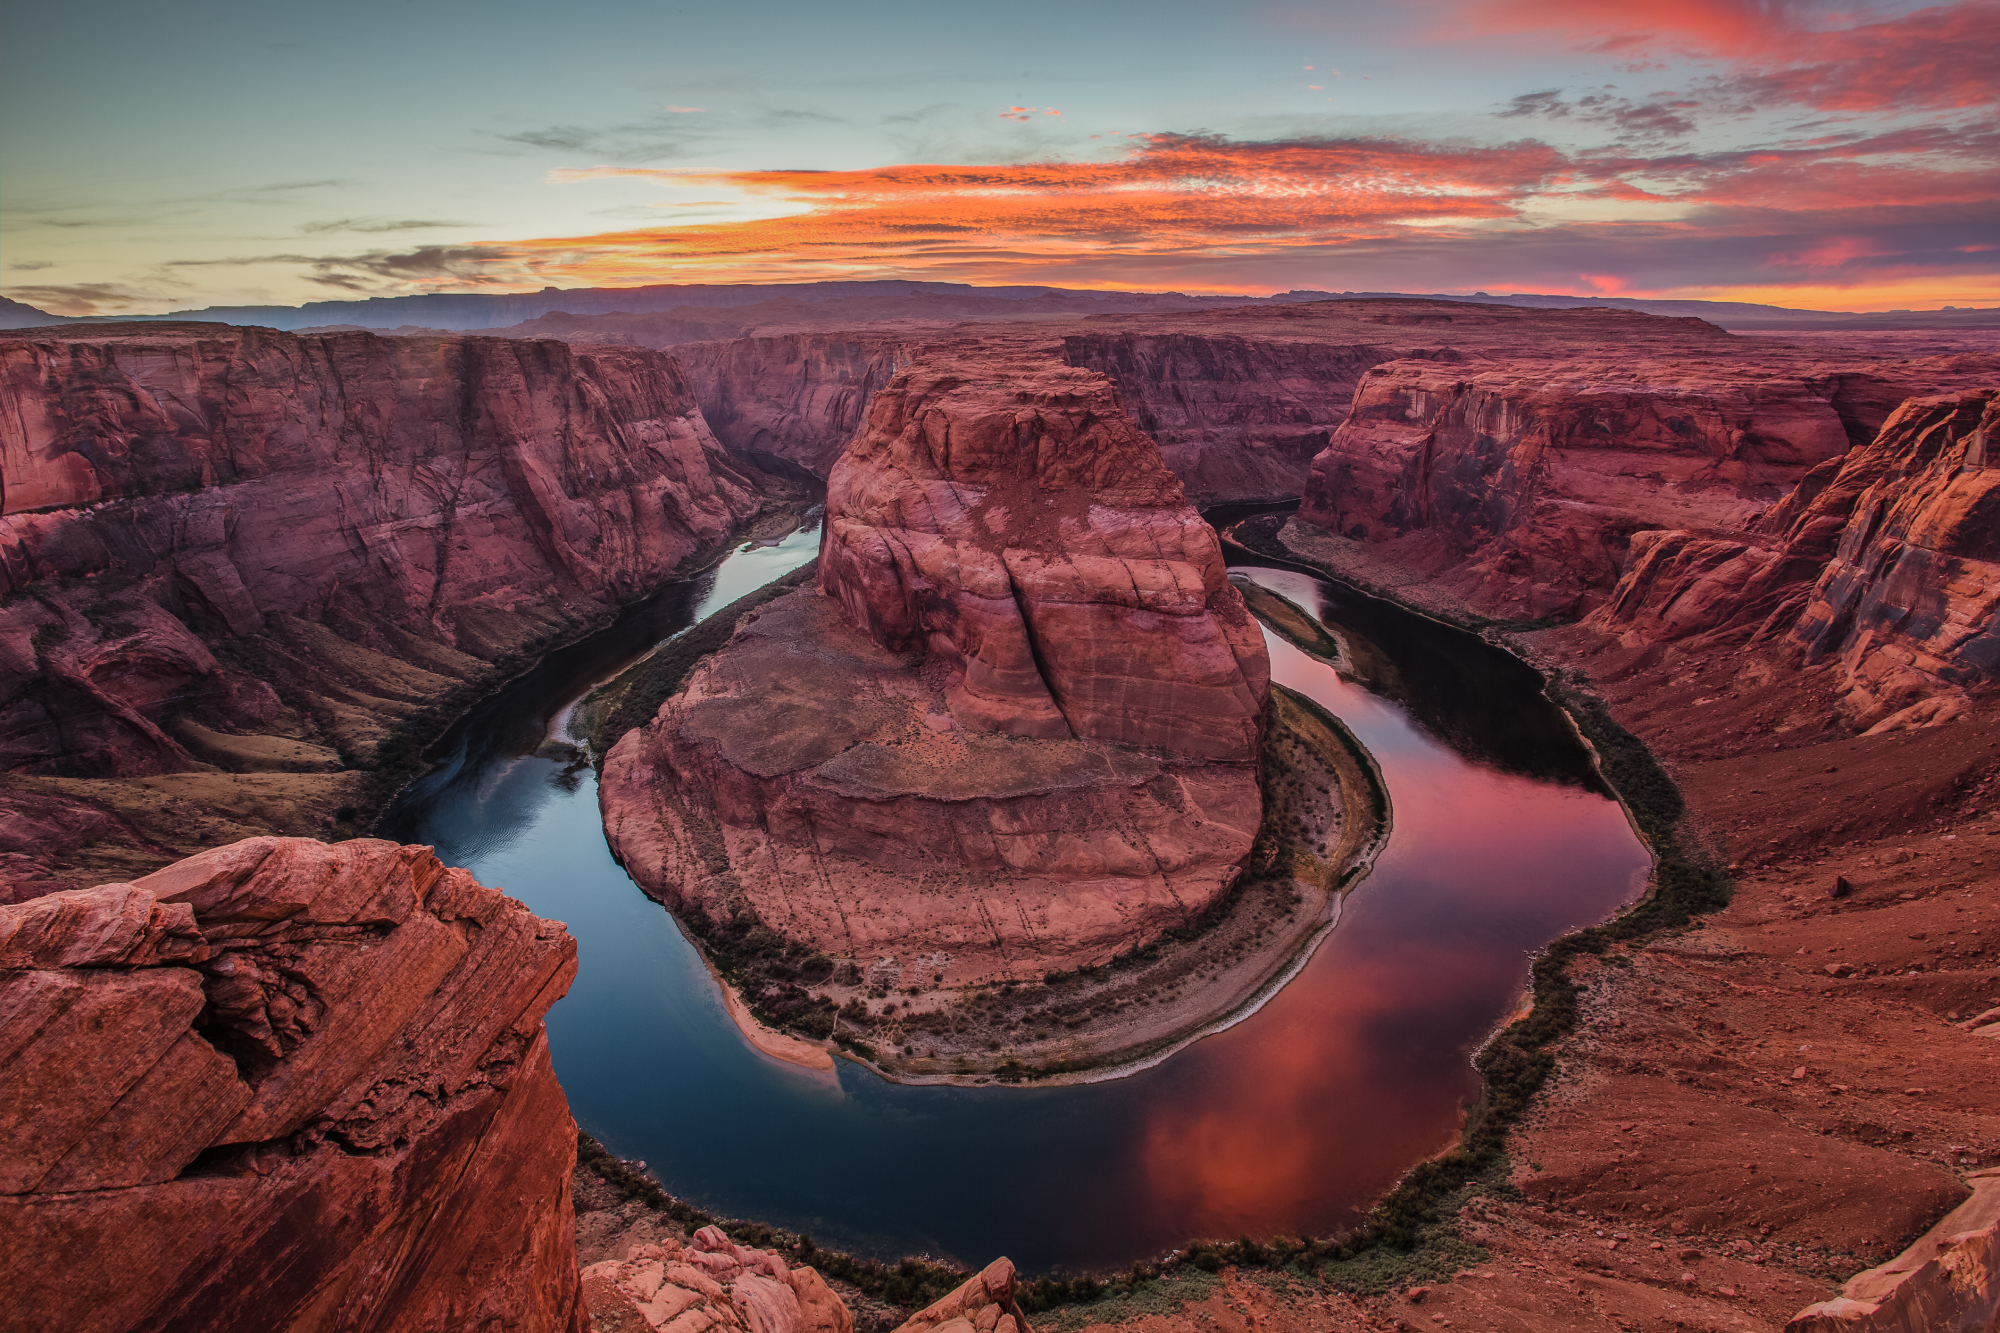 HDR Photography Workshop: Horseshoe Bend HDR | Pt.3 | HDR Processing in Photomatix Pro